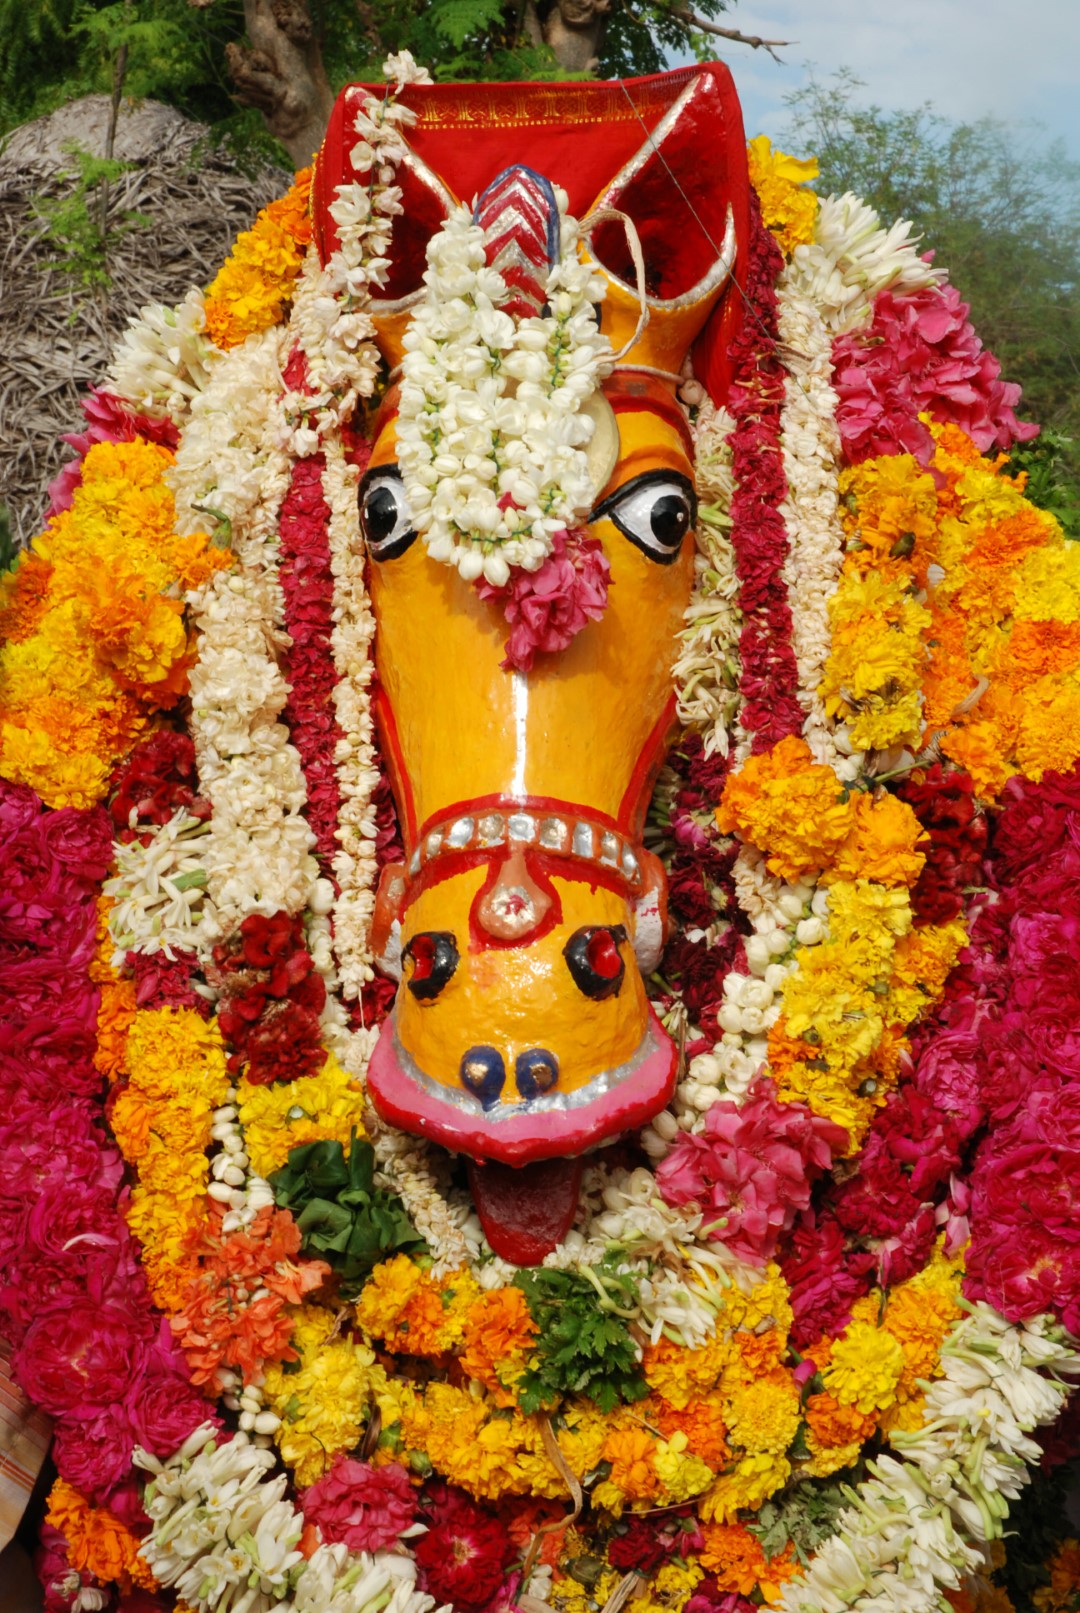 <span style="font-weight:normal;">The principle offering of a festival is called the <i>ure-kutherai</i>, literally "village horse." The largest and most prestigious of all the offerings, it receives the greatest honours and decorations by the devotees.</span>